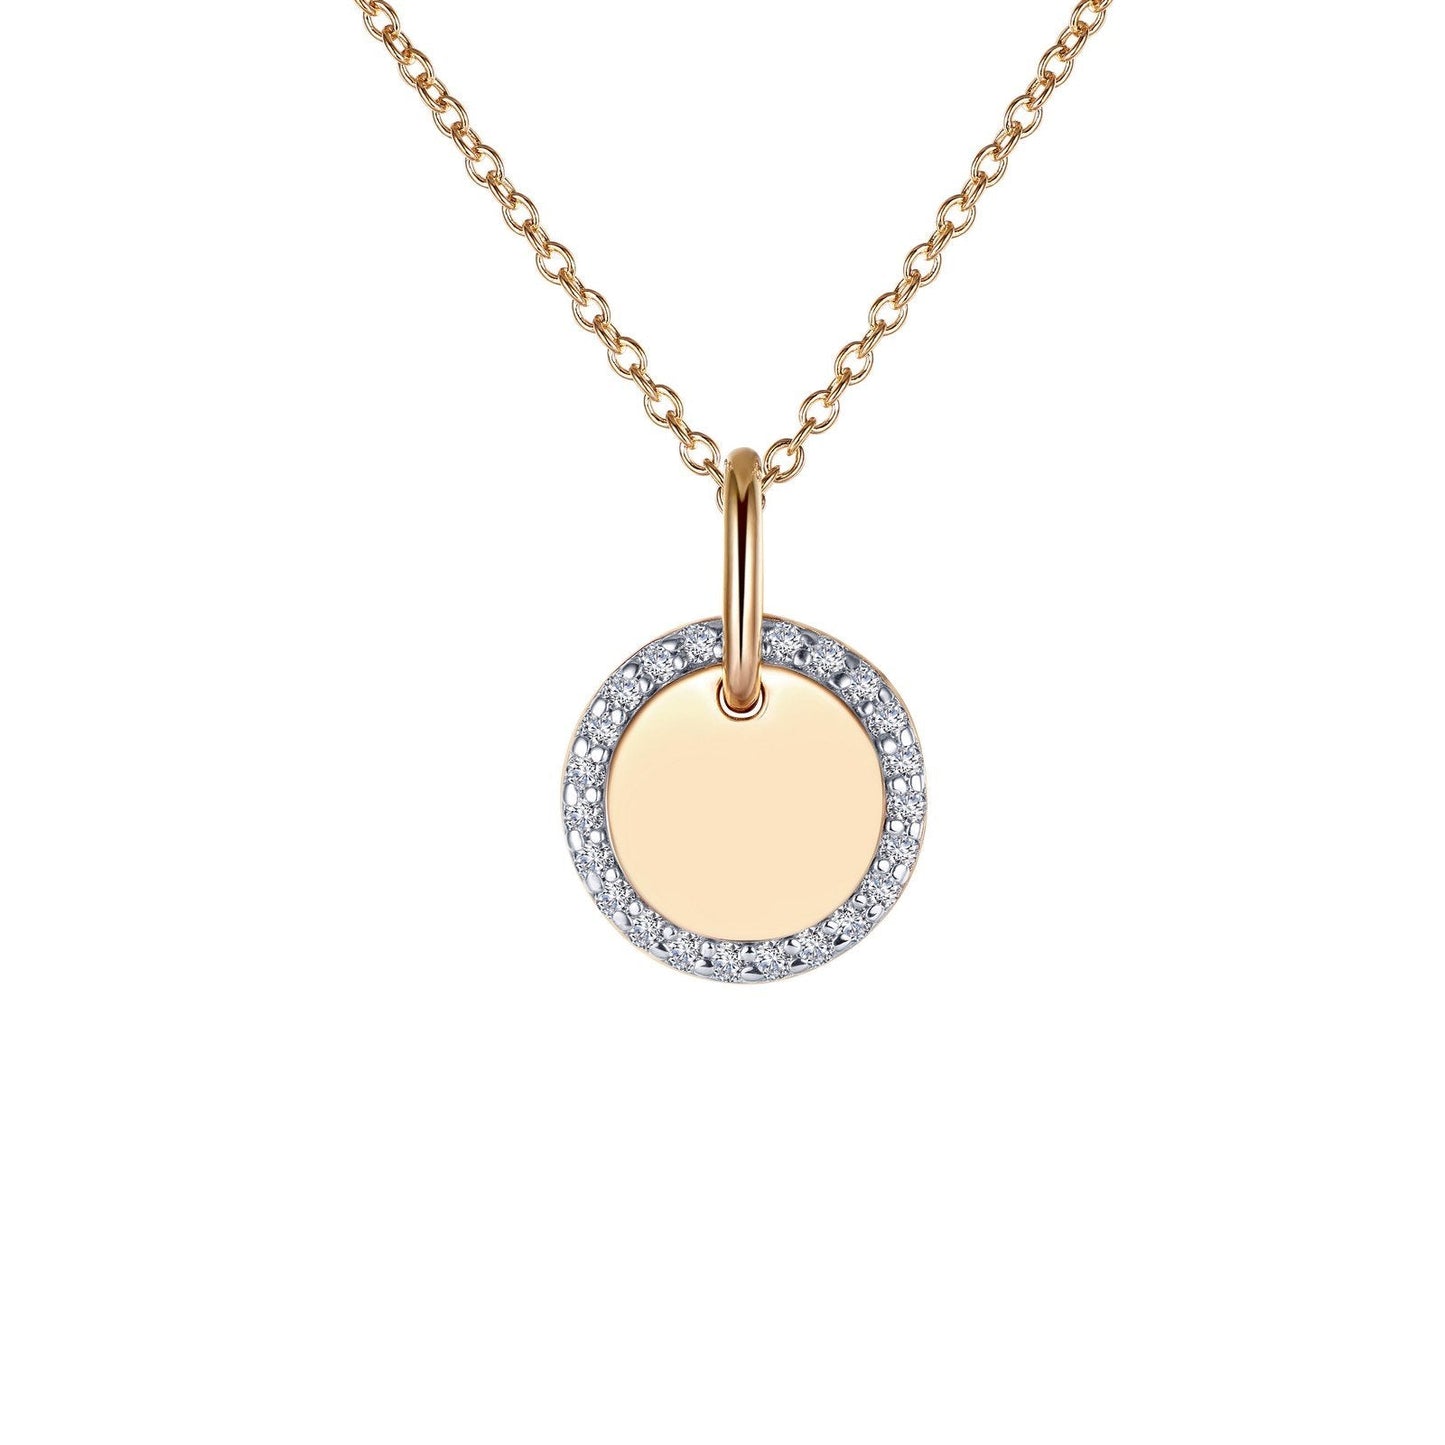 Lafonn Round Disc Pendant Necklace Simulated Diamond NECKLACES Mixed-Color 0.23 CTS Approx. 14.7mm (H) x 10.2mm (W)